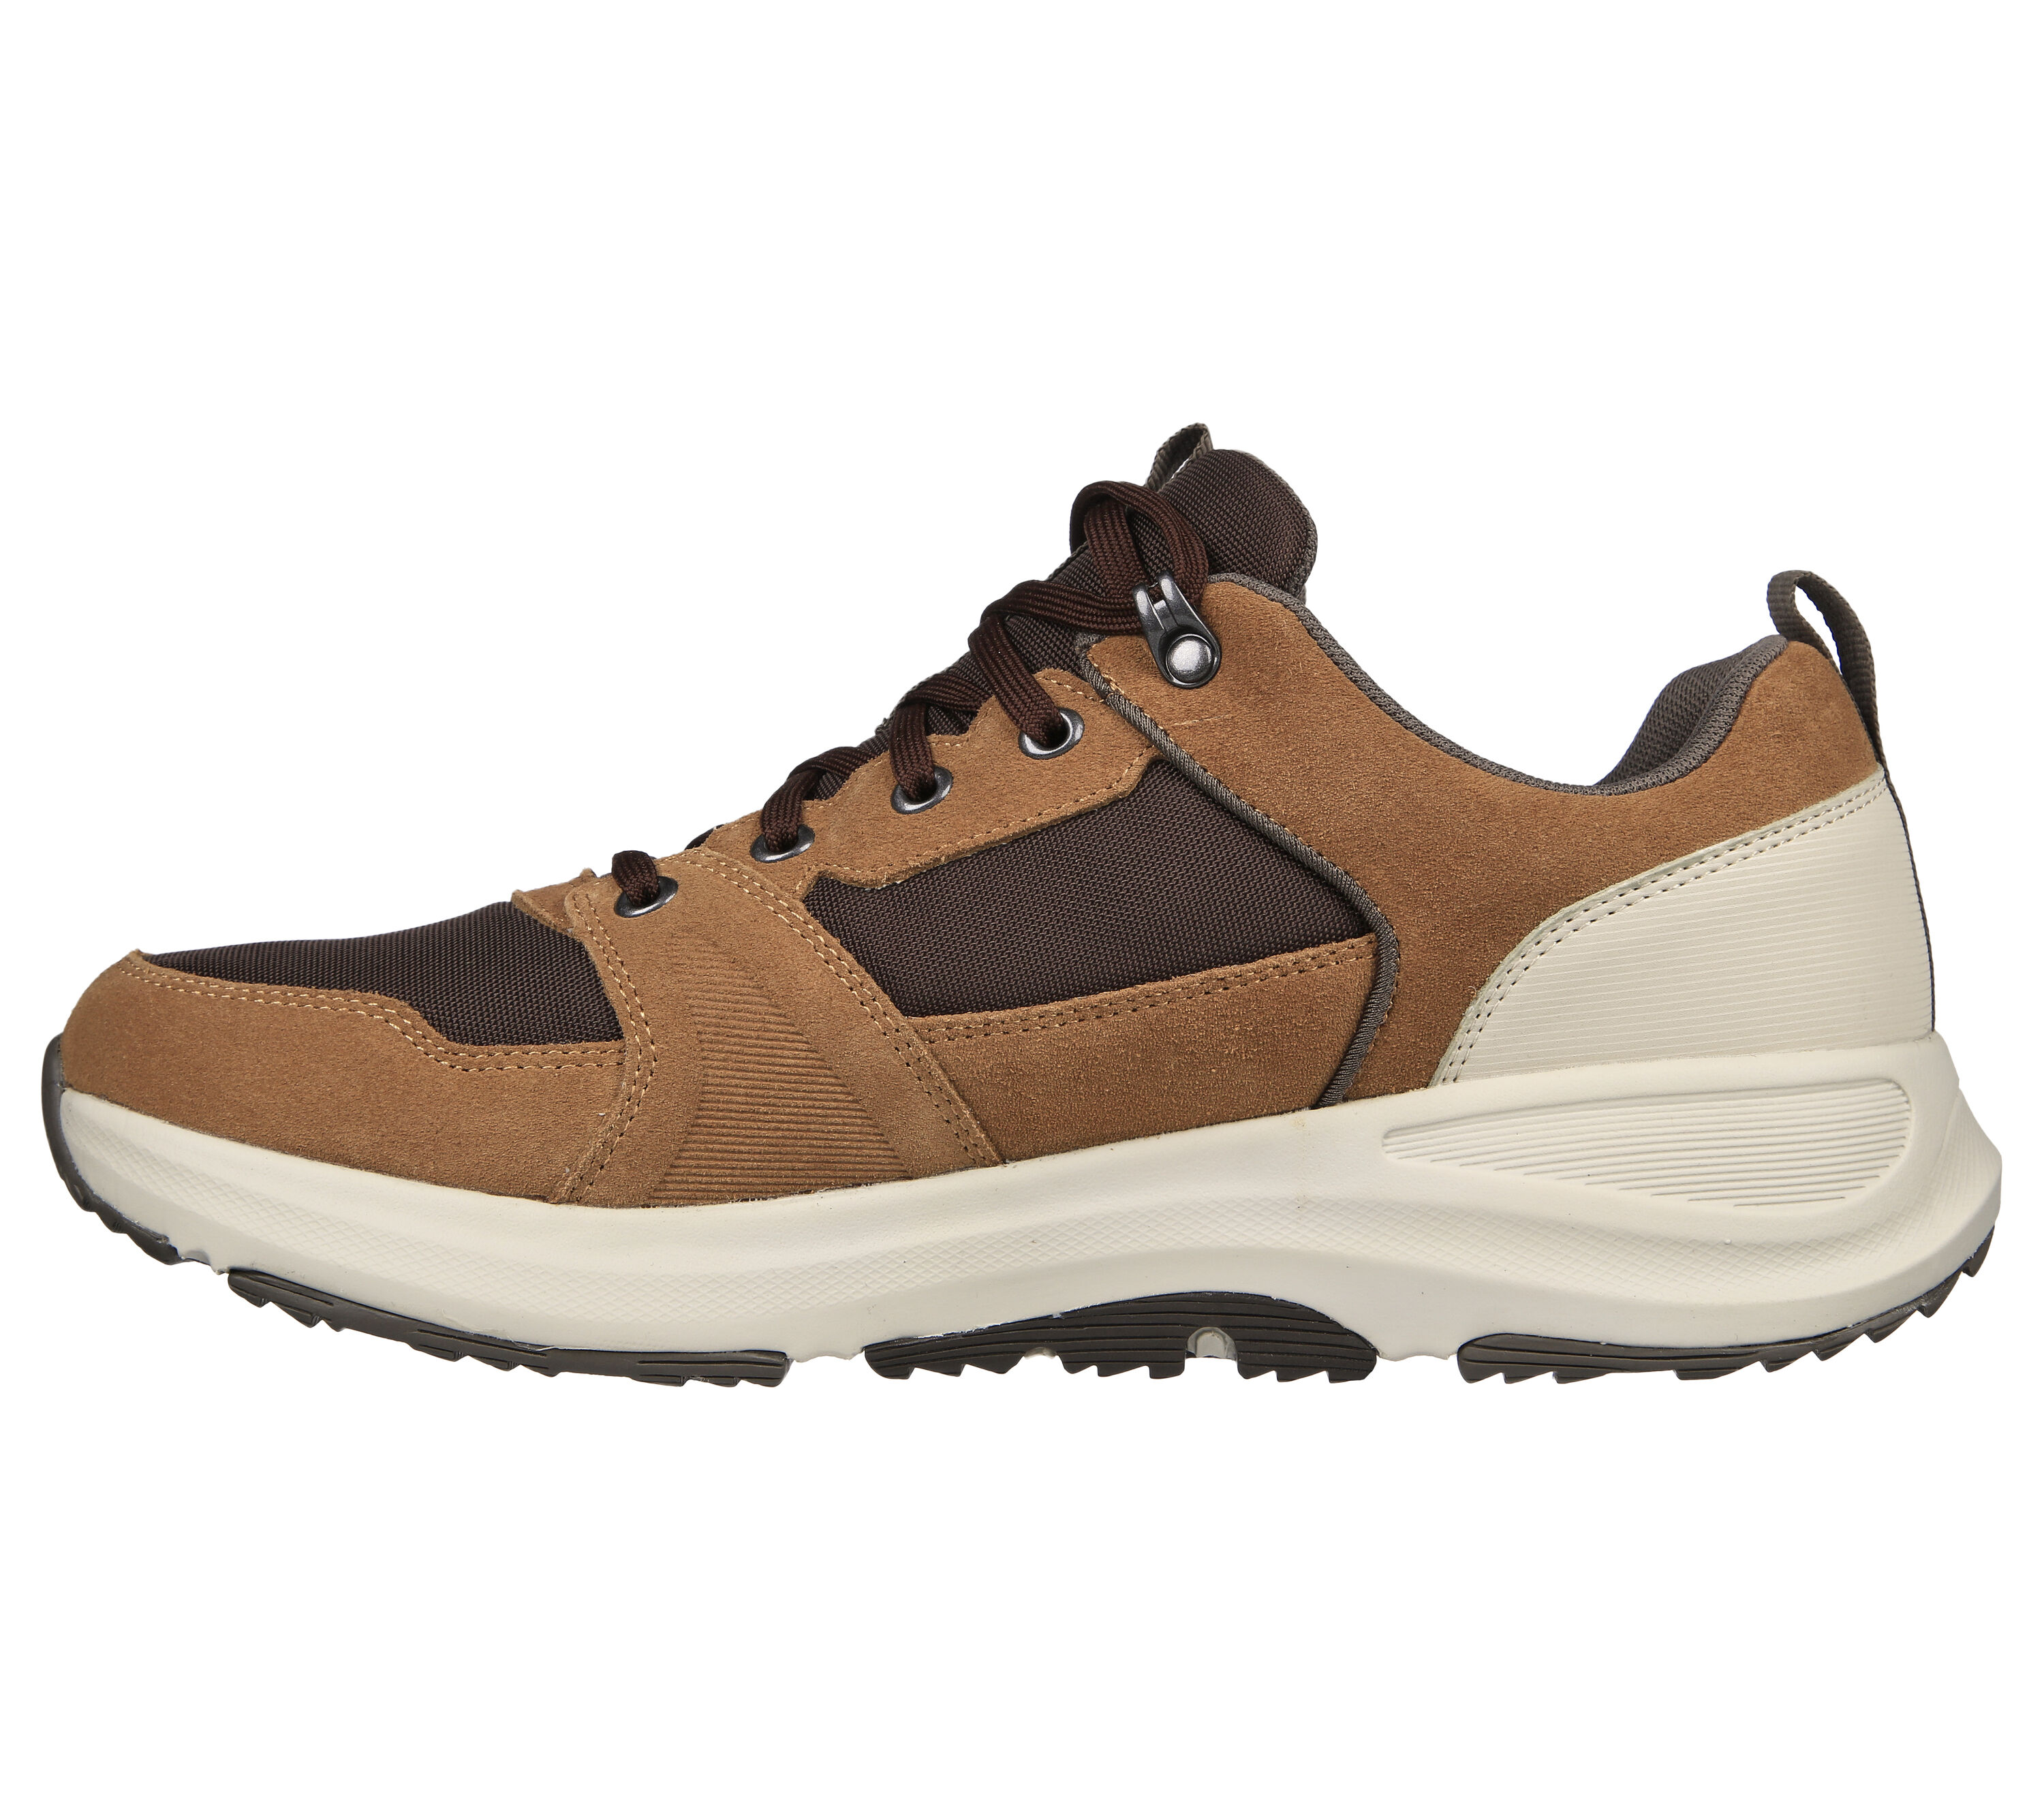 Go Walk Outdoor - Massif - Brown / Tan Leather/Synthetic